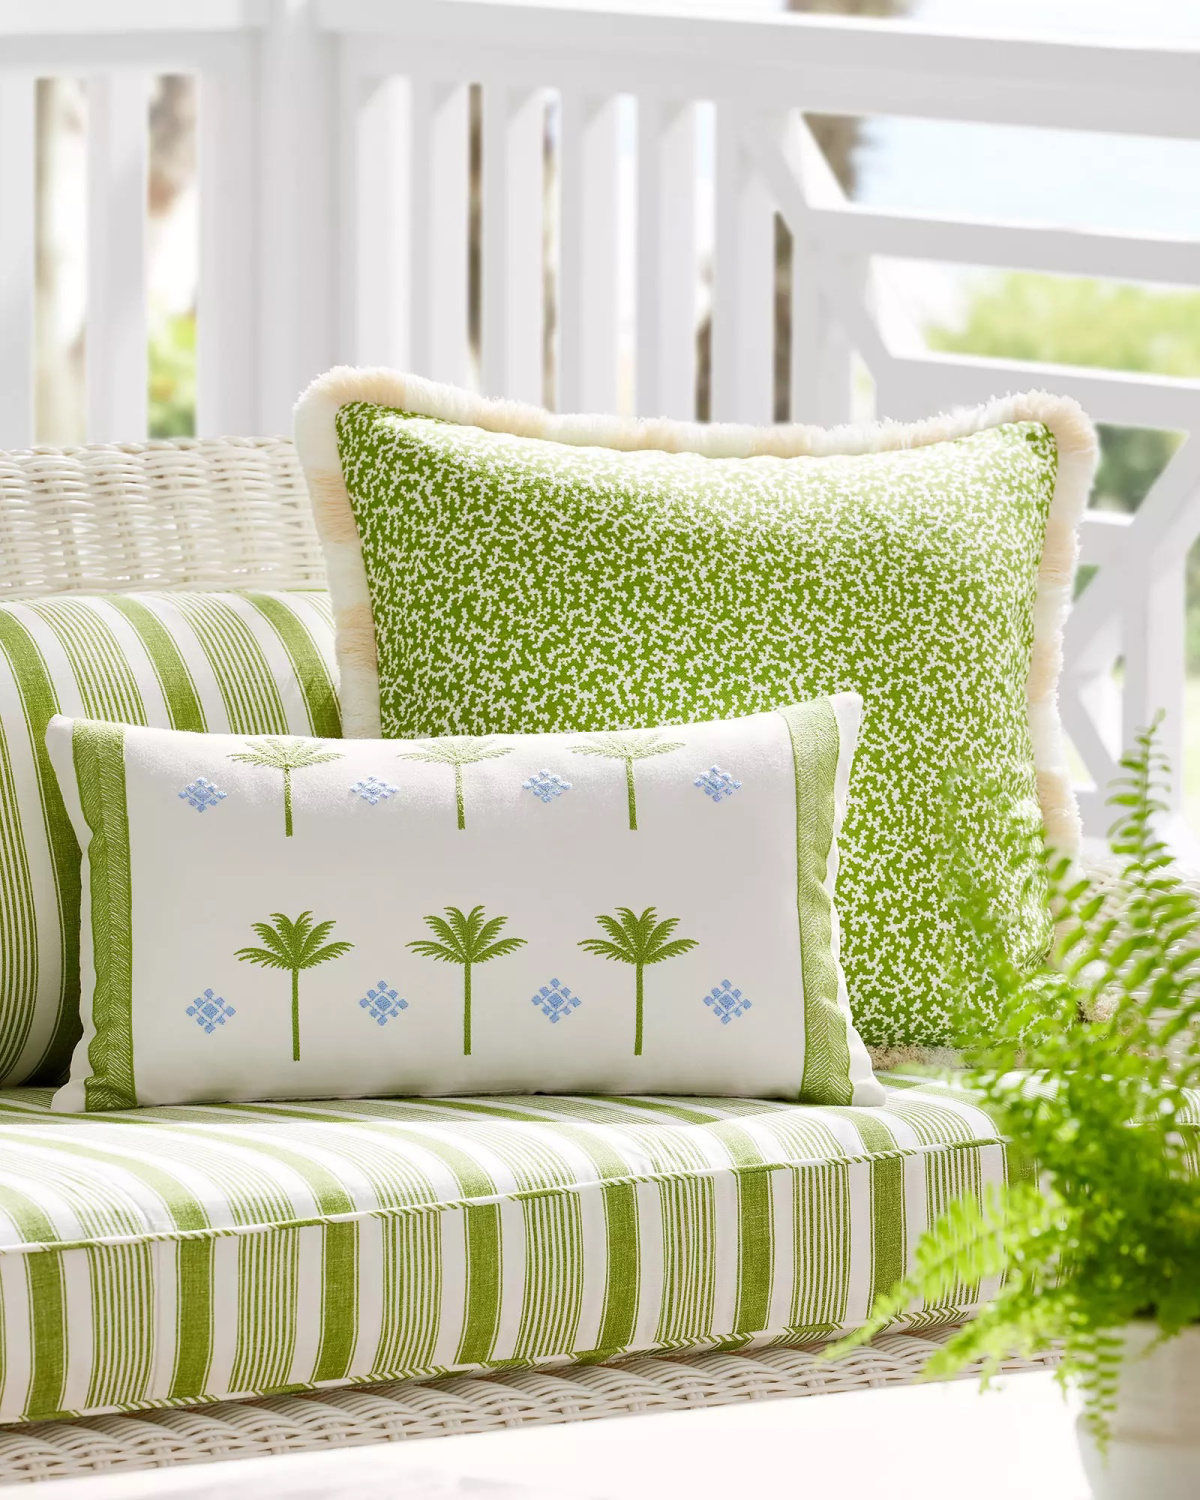 Serena & Lily green and white outdoor cushions and pillows.